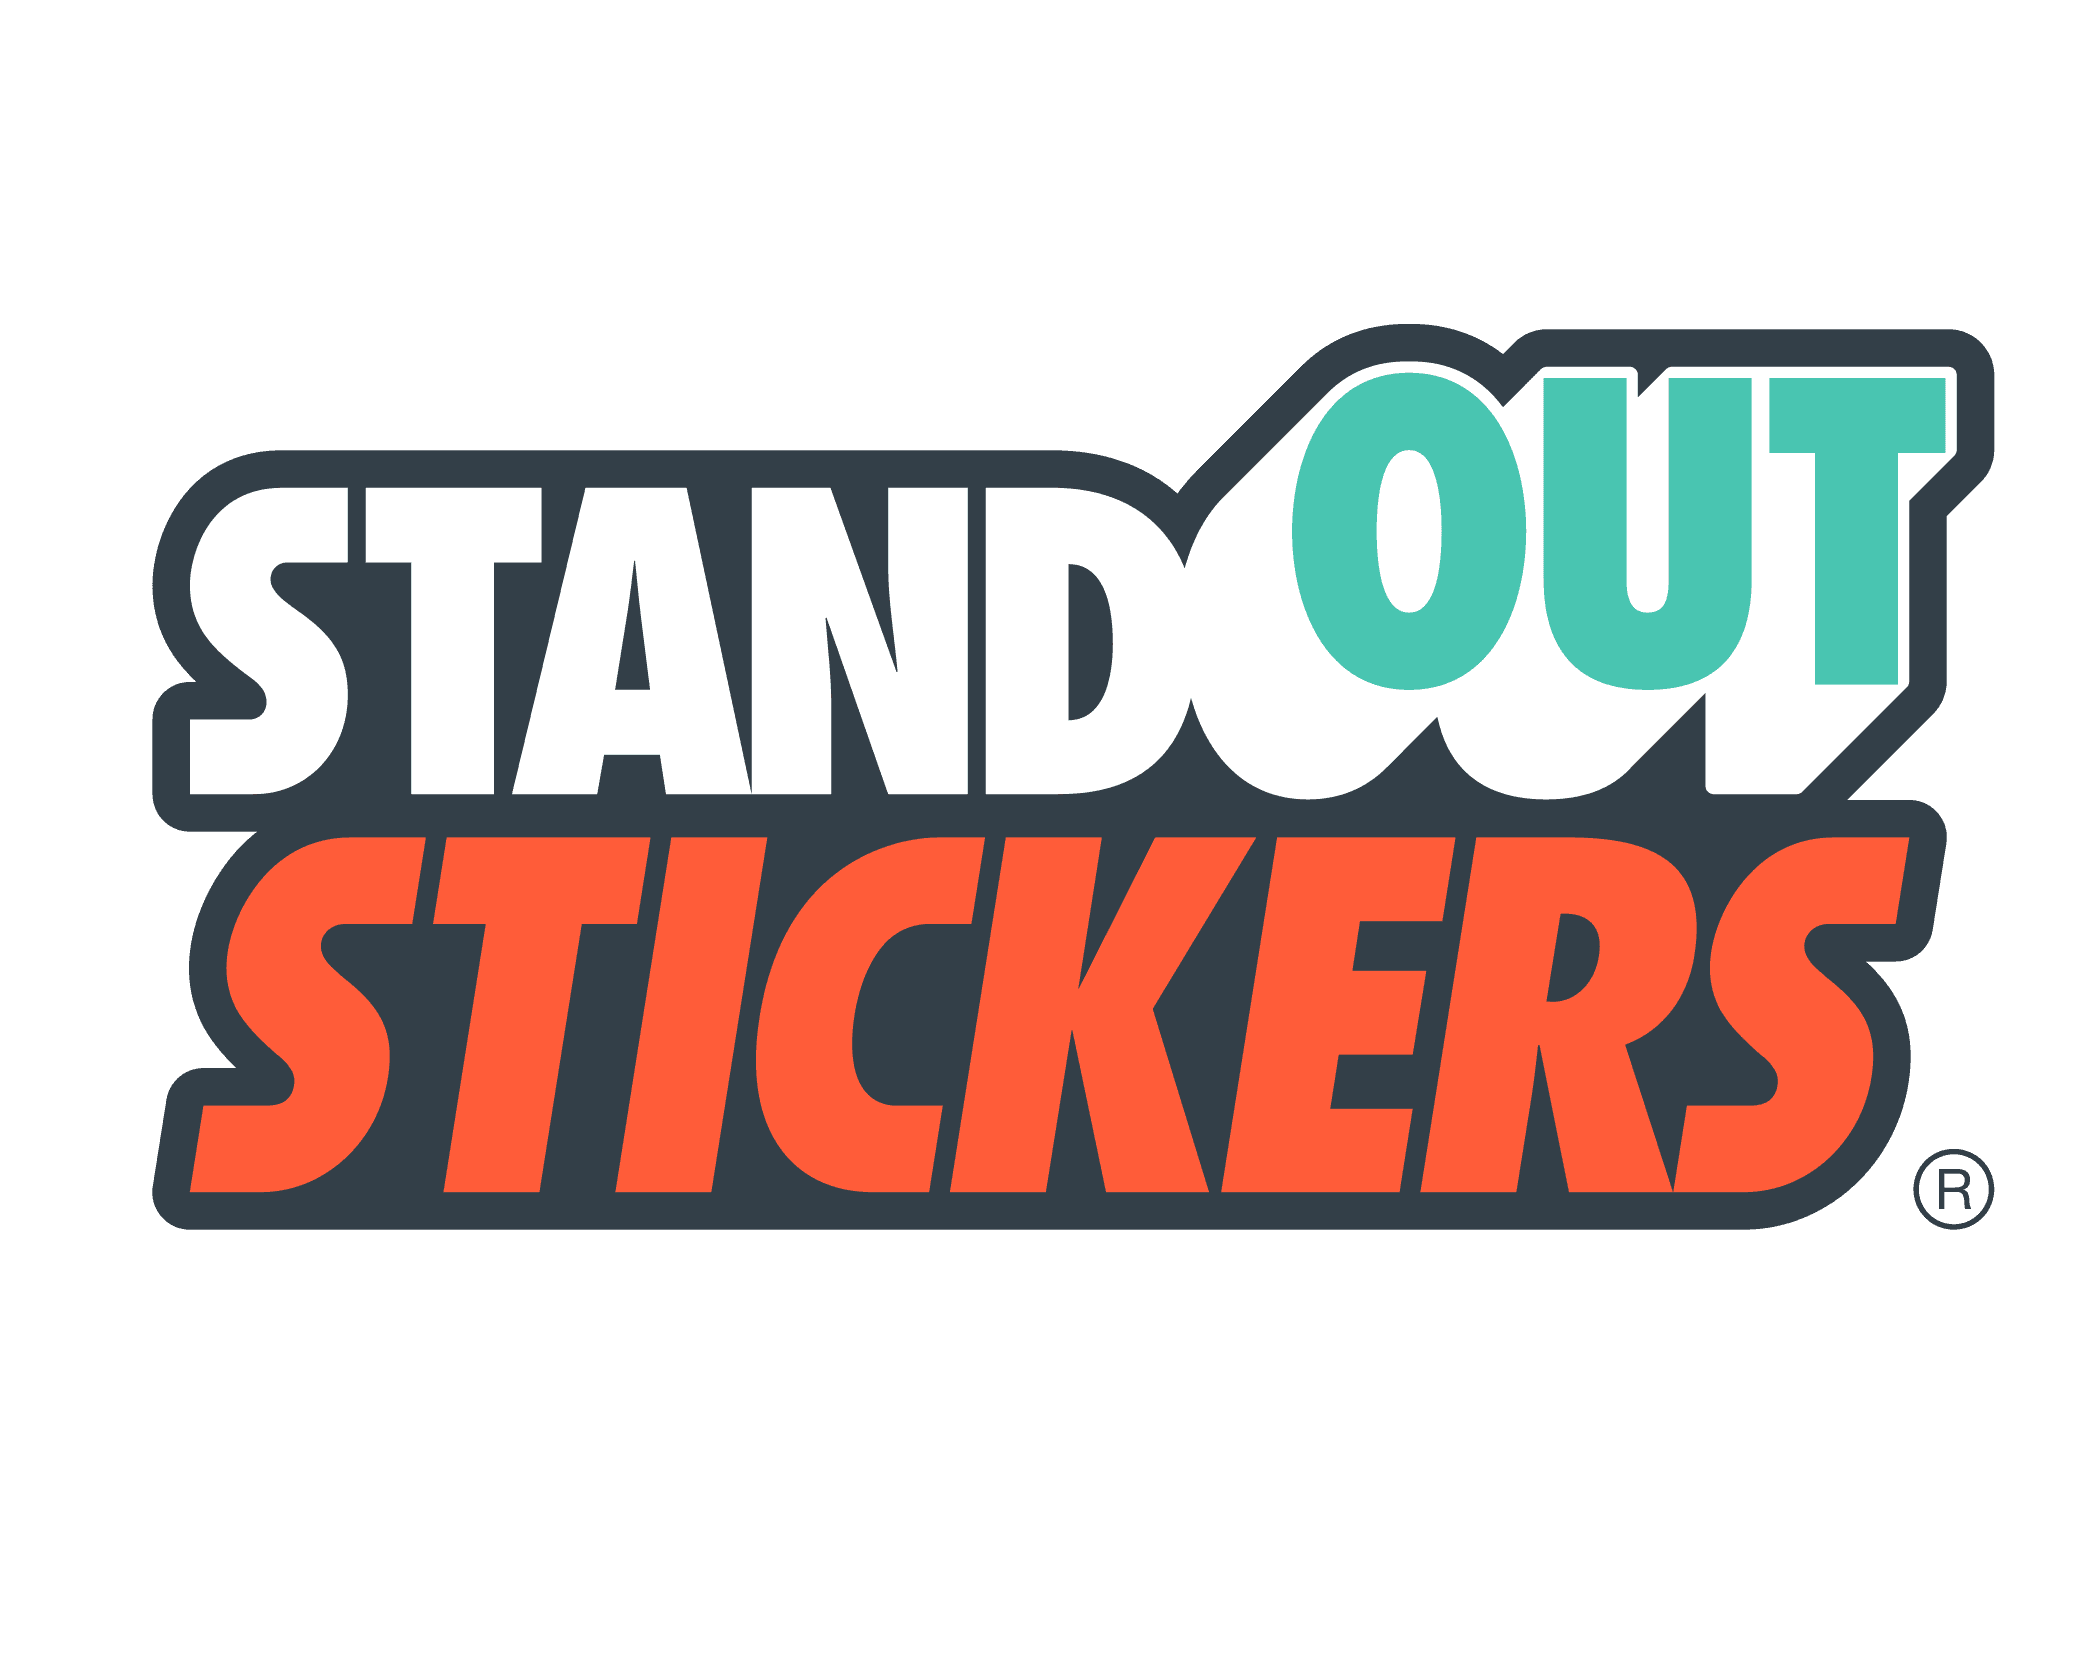 /src/assets/stand-out-stickers-logo.png